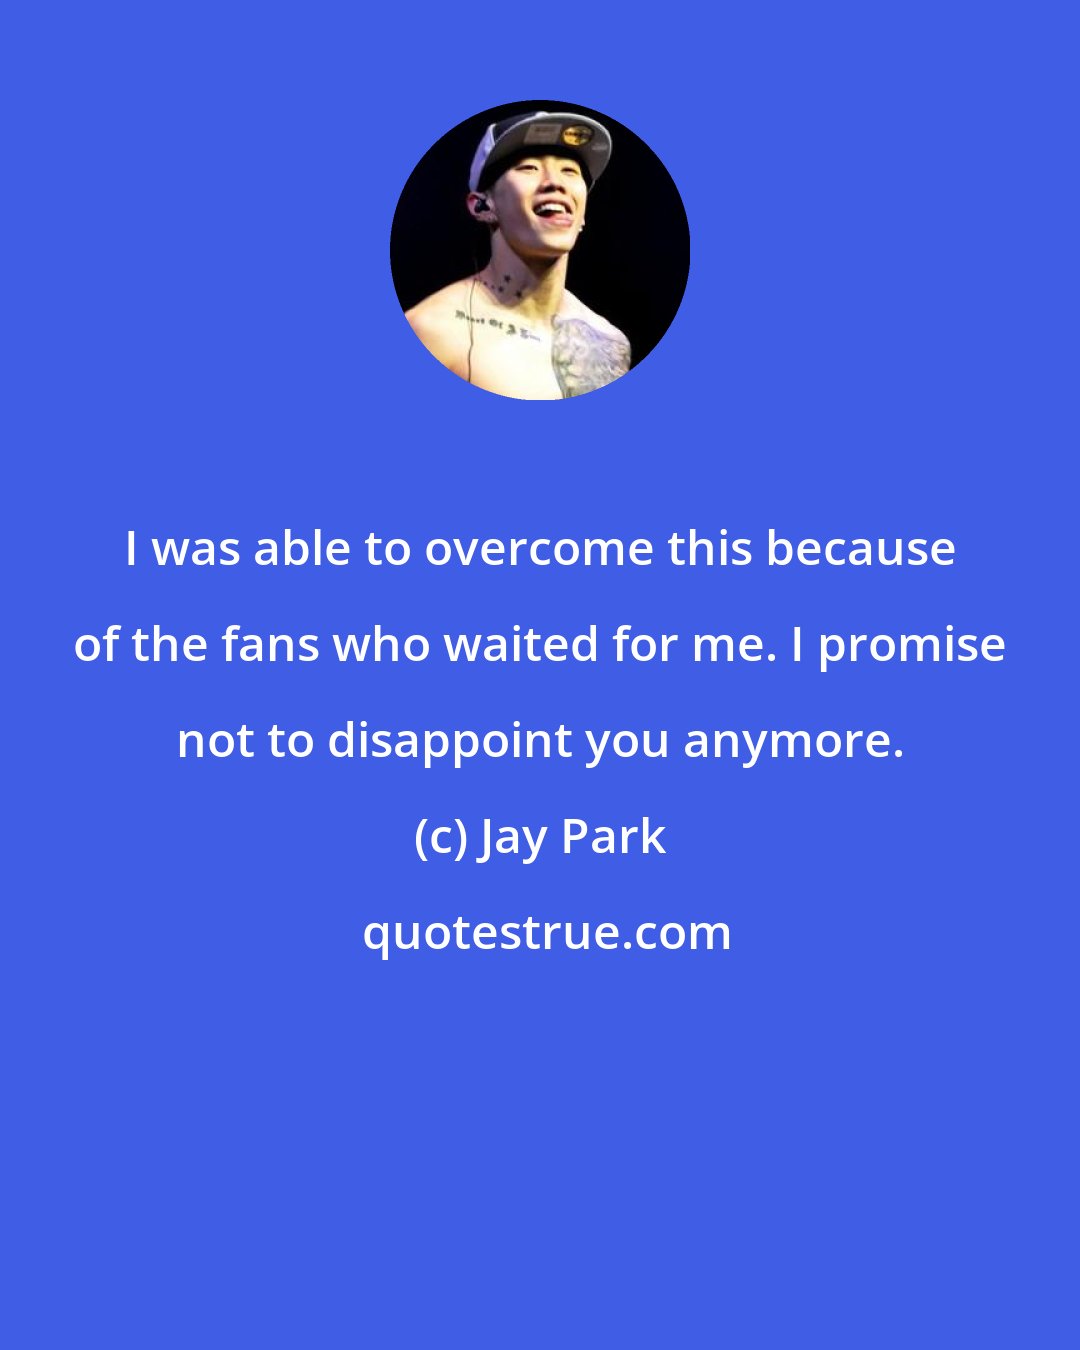 Jay Park: I was able to overcome this because of the fans who waited for me. I promise not to disappoint you anymore.